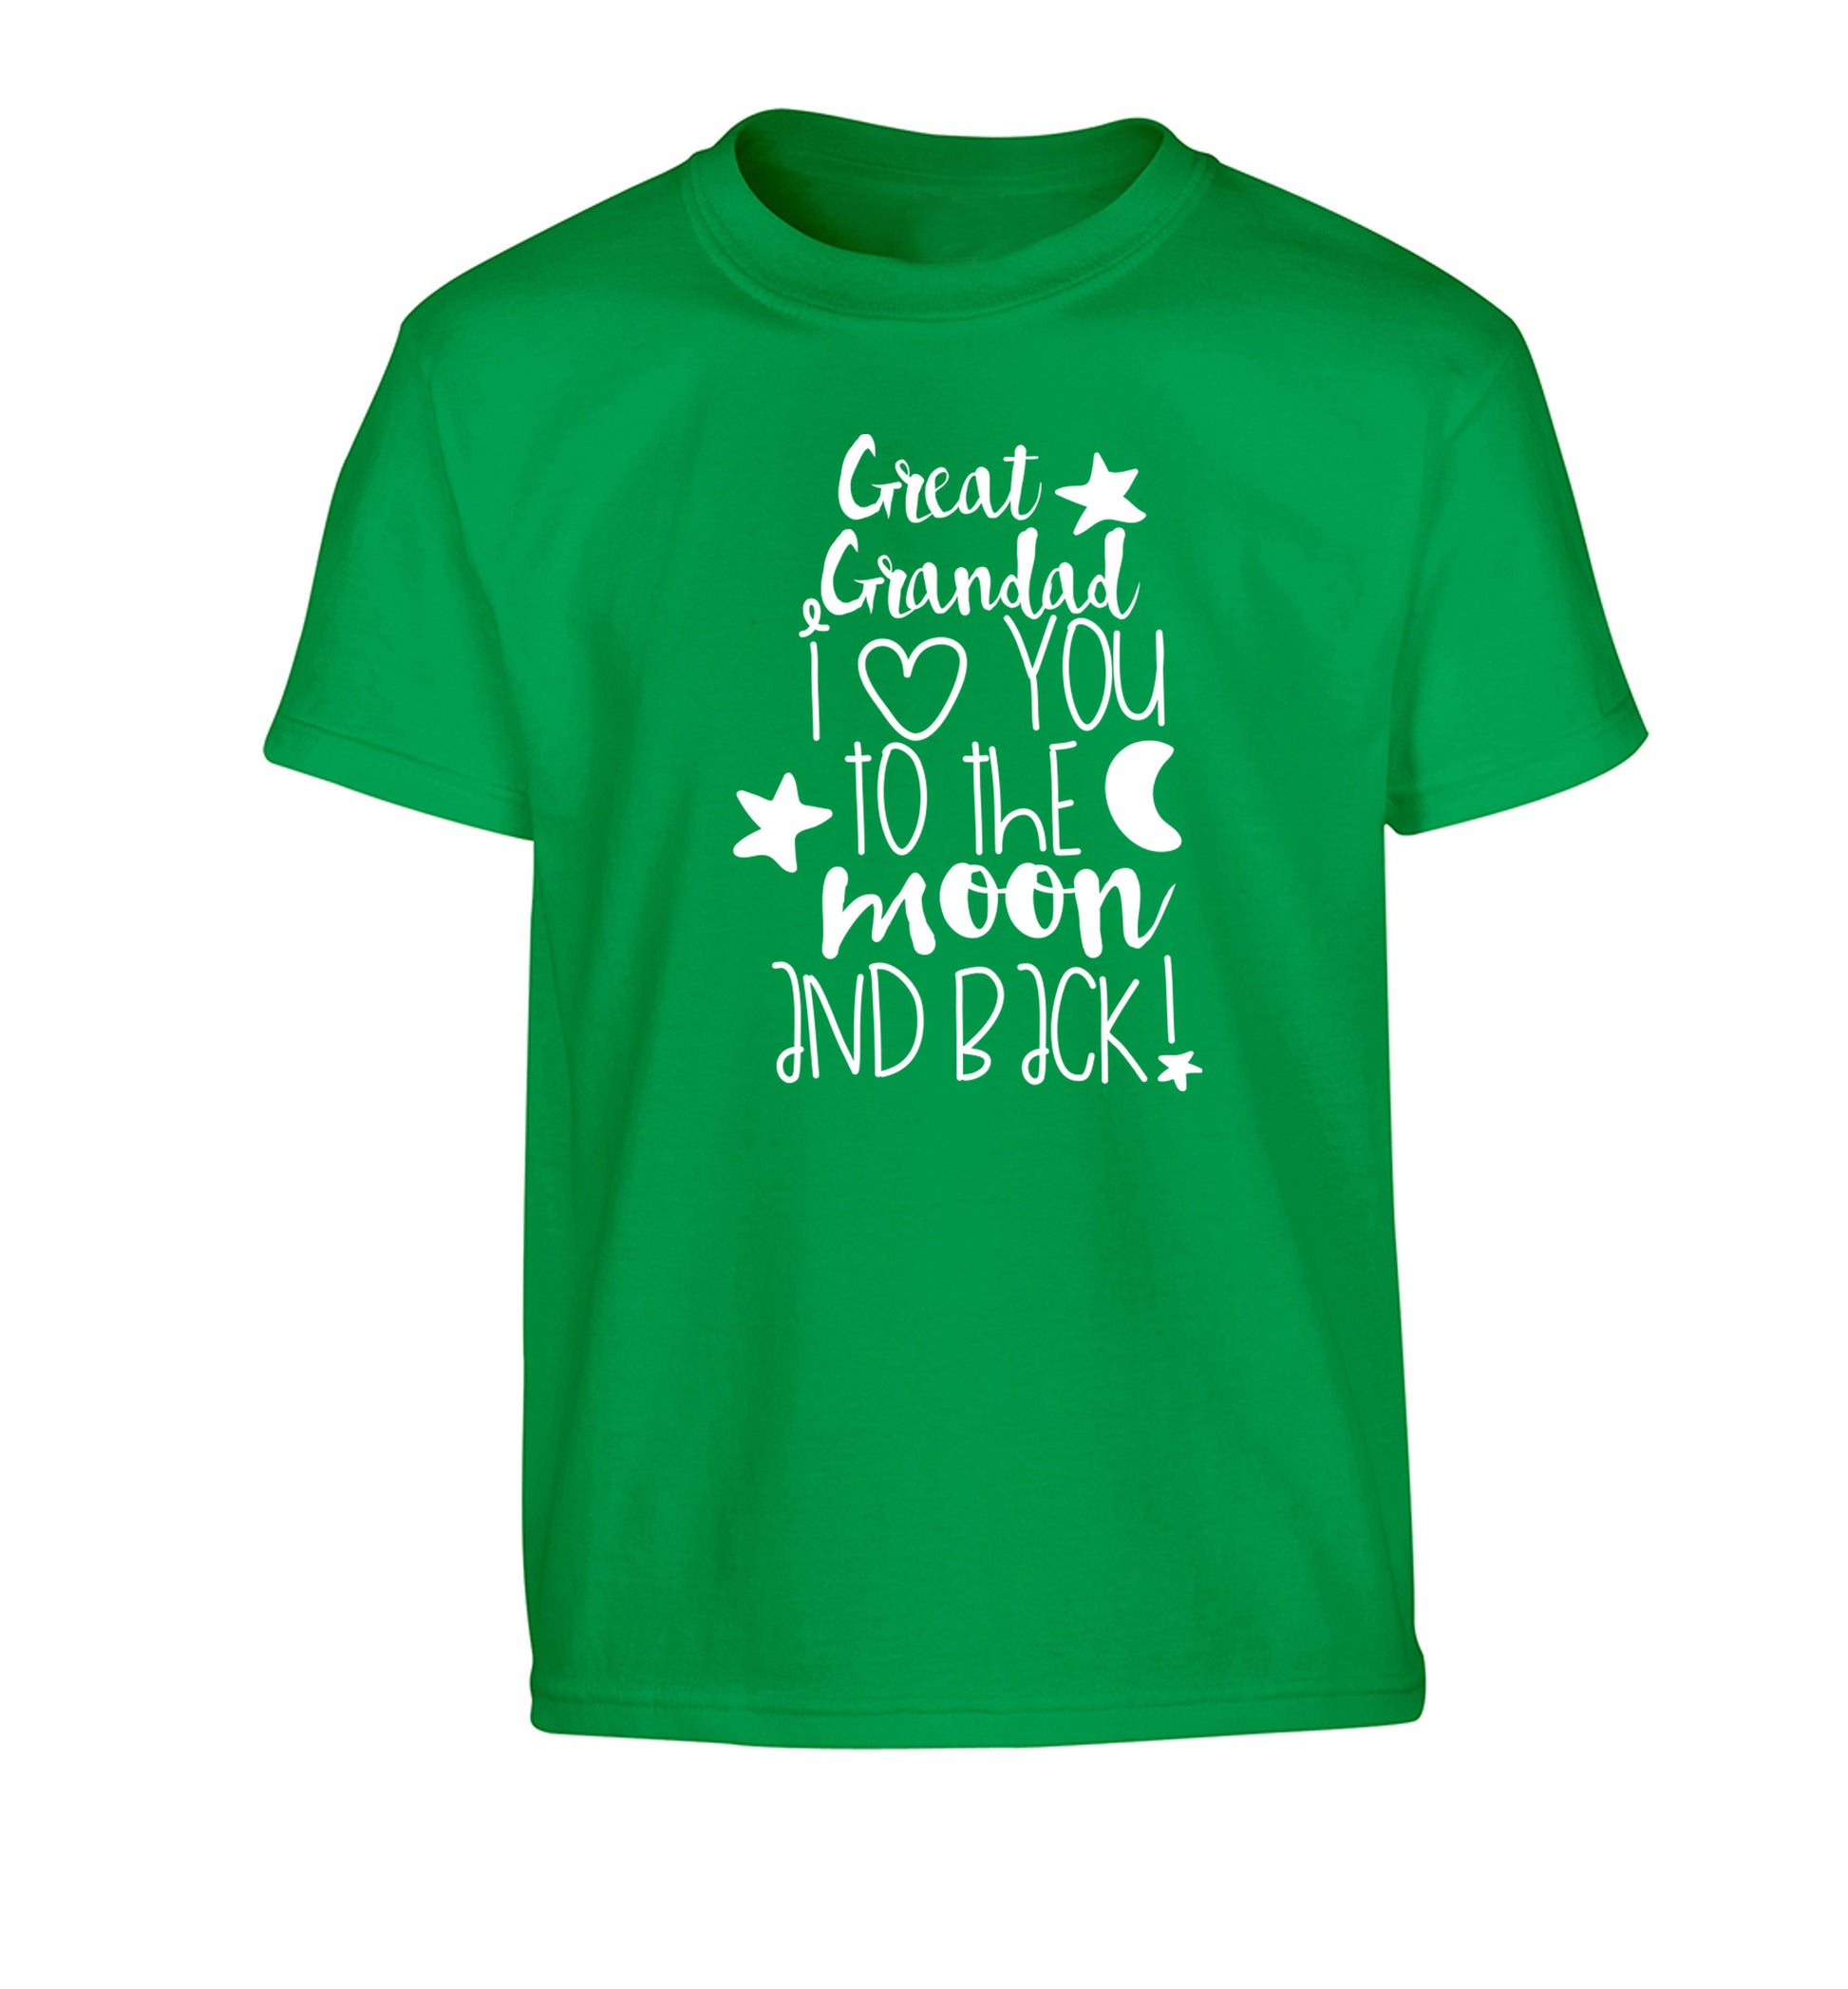 Great Grandad I love you to the moon and back Children's green Tshirt 12-14 Years